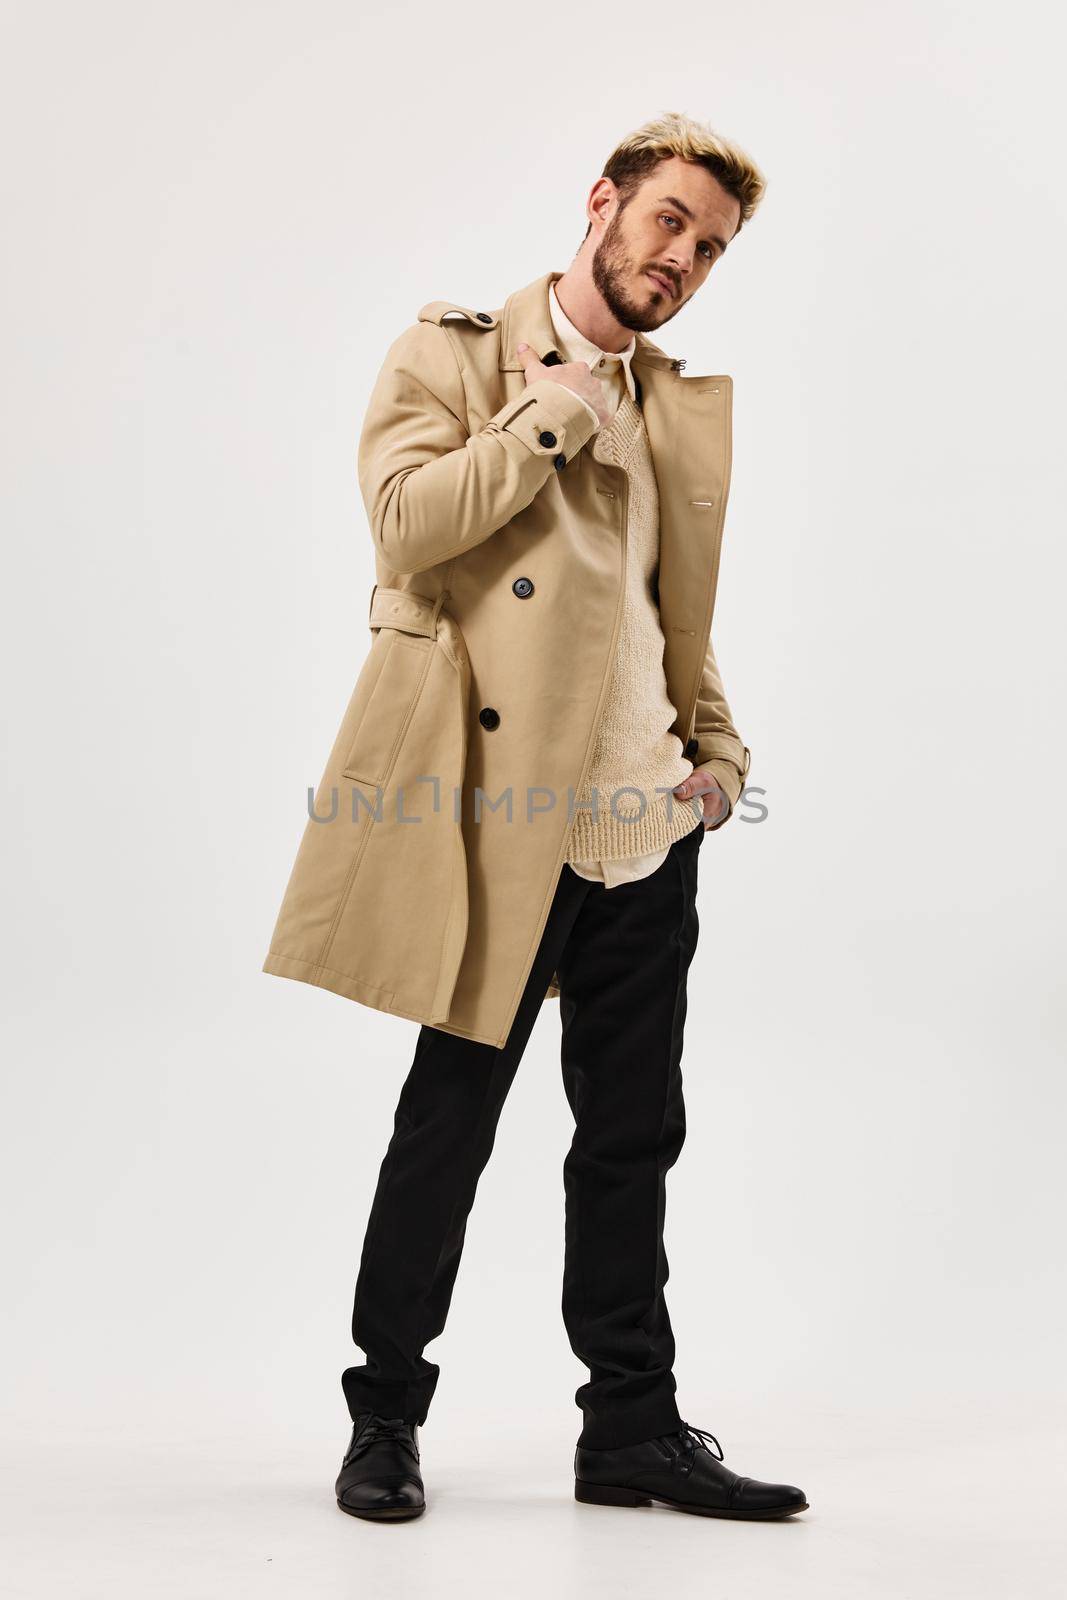 man in beige coat autumn style studio full growth side view. High quality photo